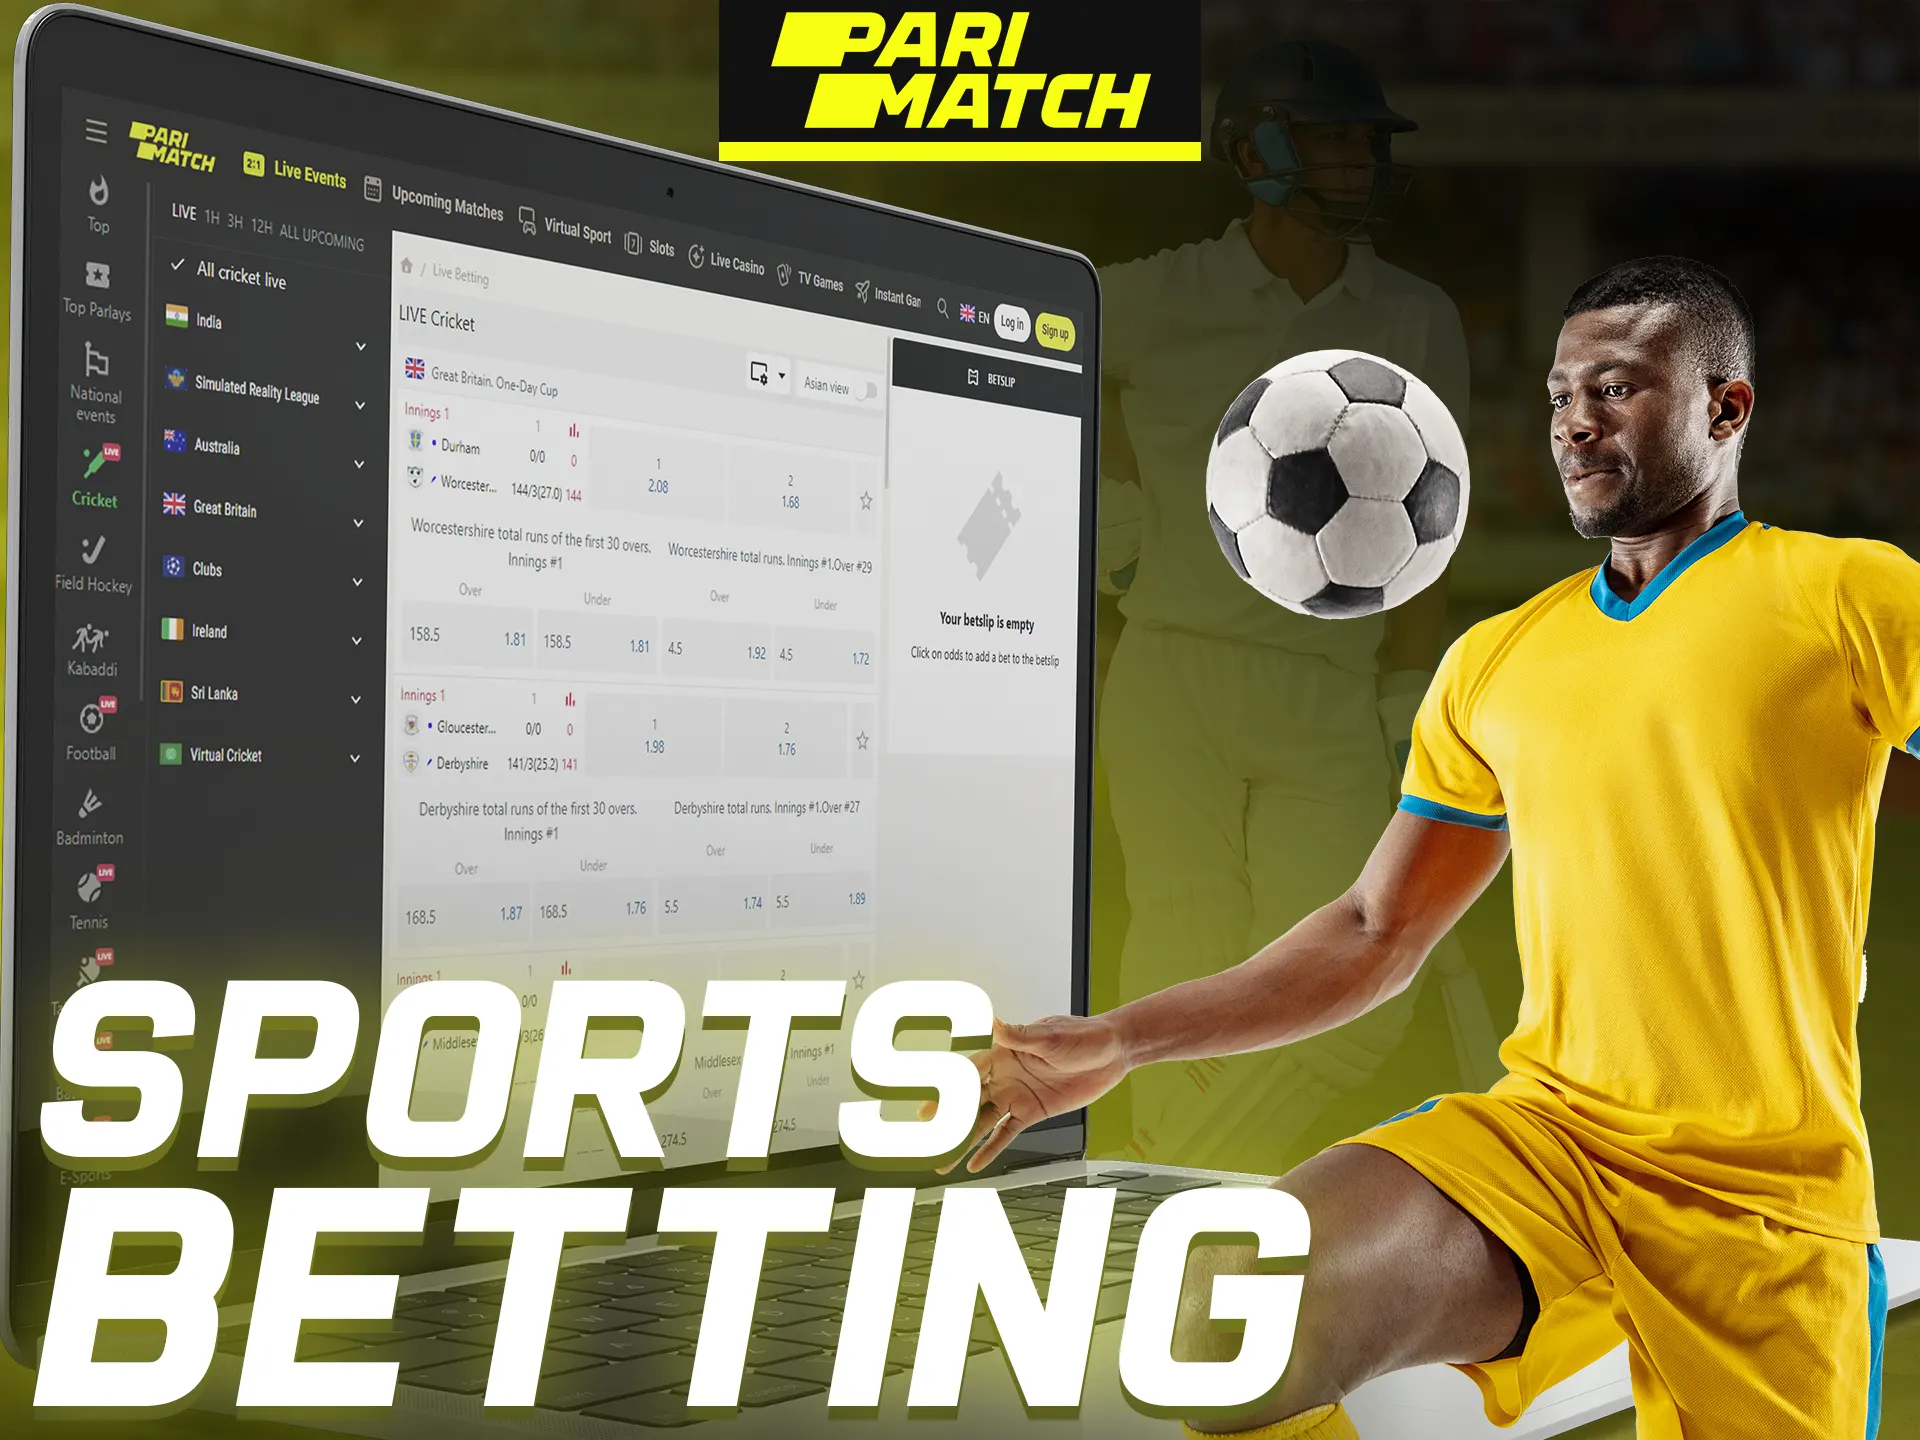 Parimatch offers betting opportunities on both famous and lesser-known sports.